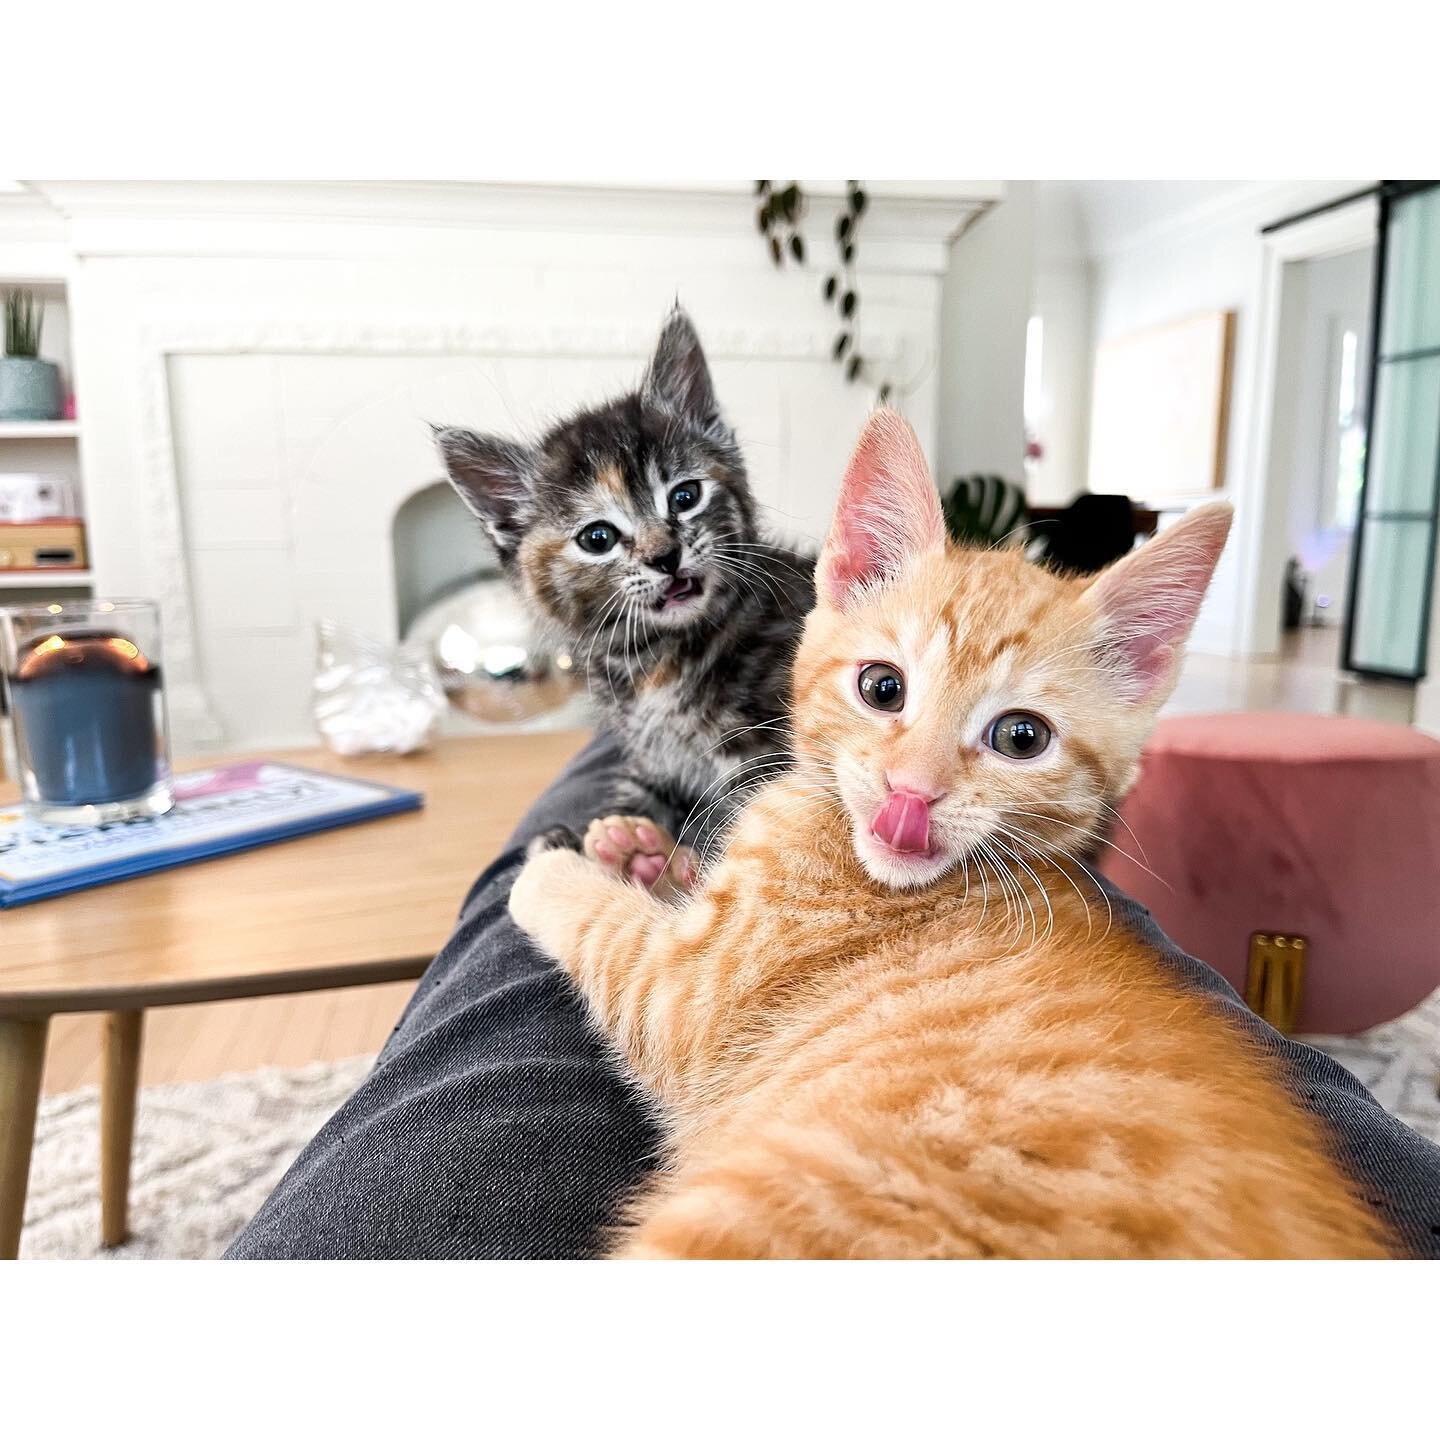 Meet Carl! This sweet orange man is ready for adoption. He&rsquo;s good-natured, playful, and loves a good snuggle sesh. He also loves dogs and other cats. (Pictured here with my other foster, Joanie. She&rsquo;ll be ready in a few weeks.) Message me